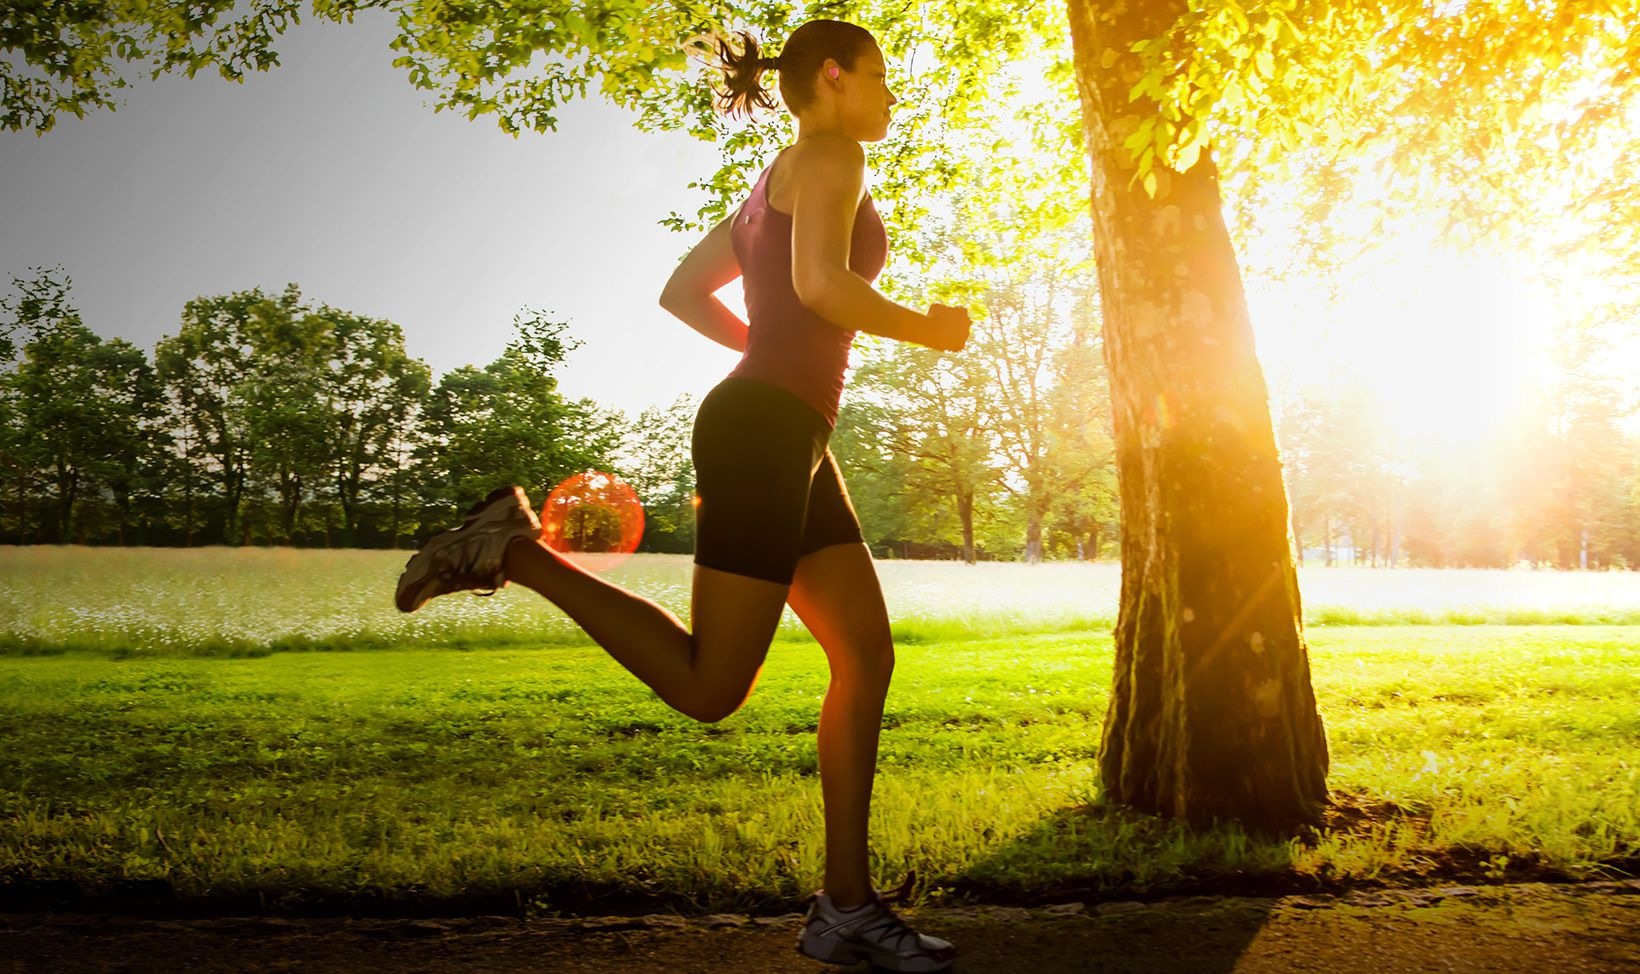 Background image of woman running in a park wearing Gear IconX